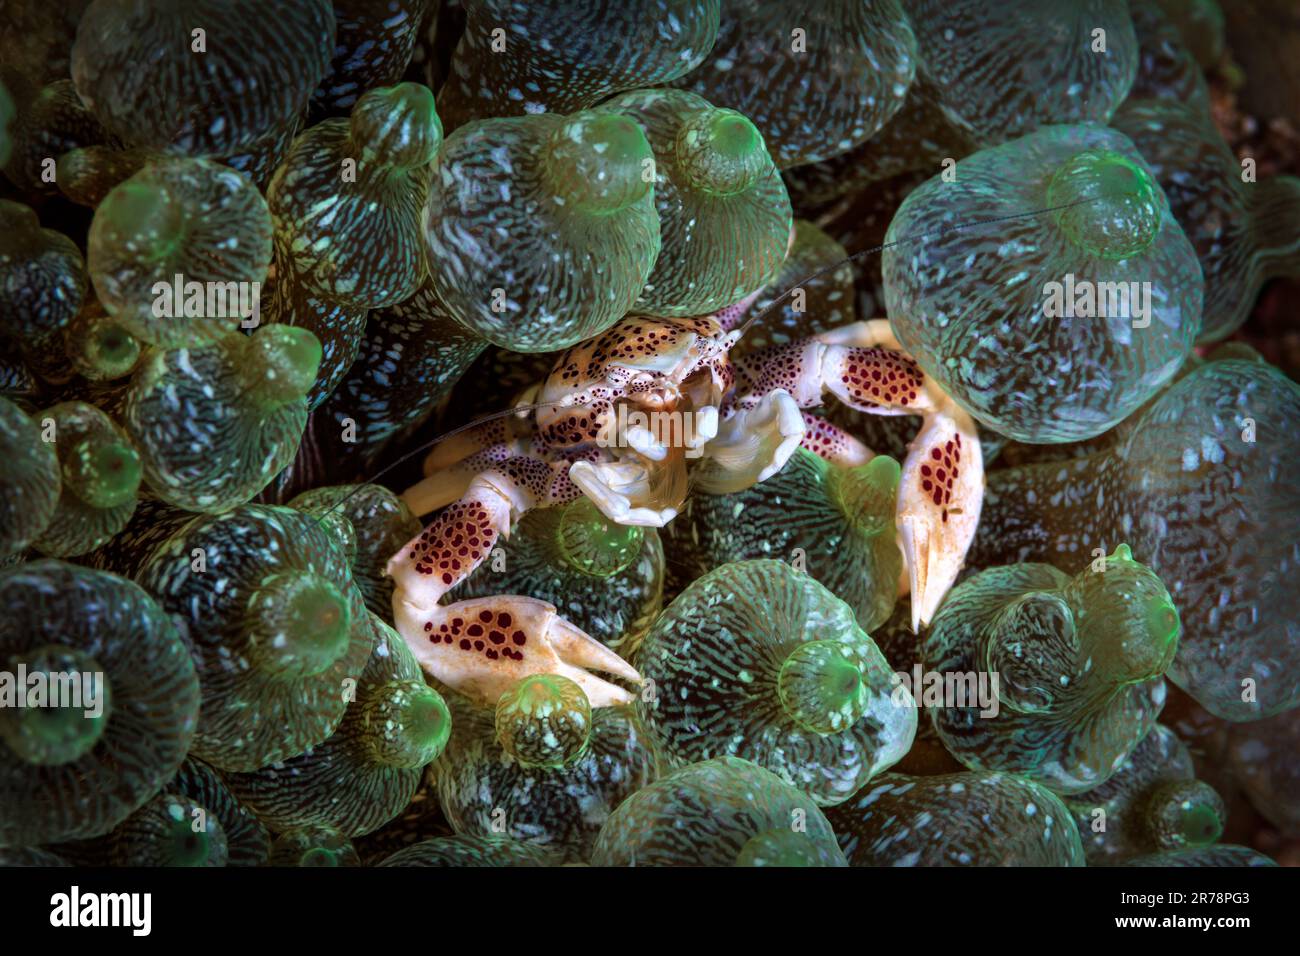 A porcelain crab finding safety within the tentacles of a green bubble tip anemone Stock Photo